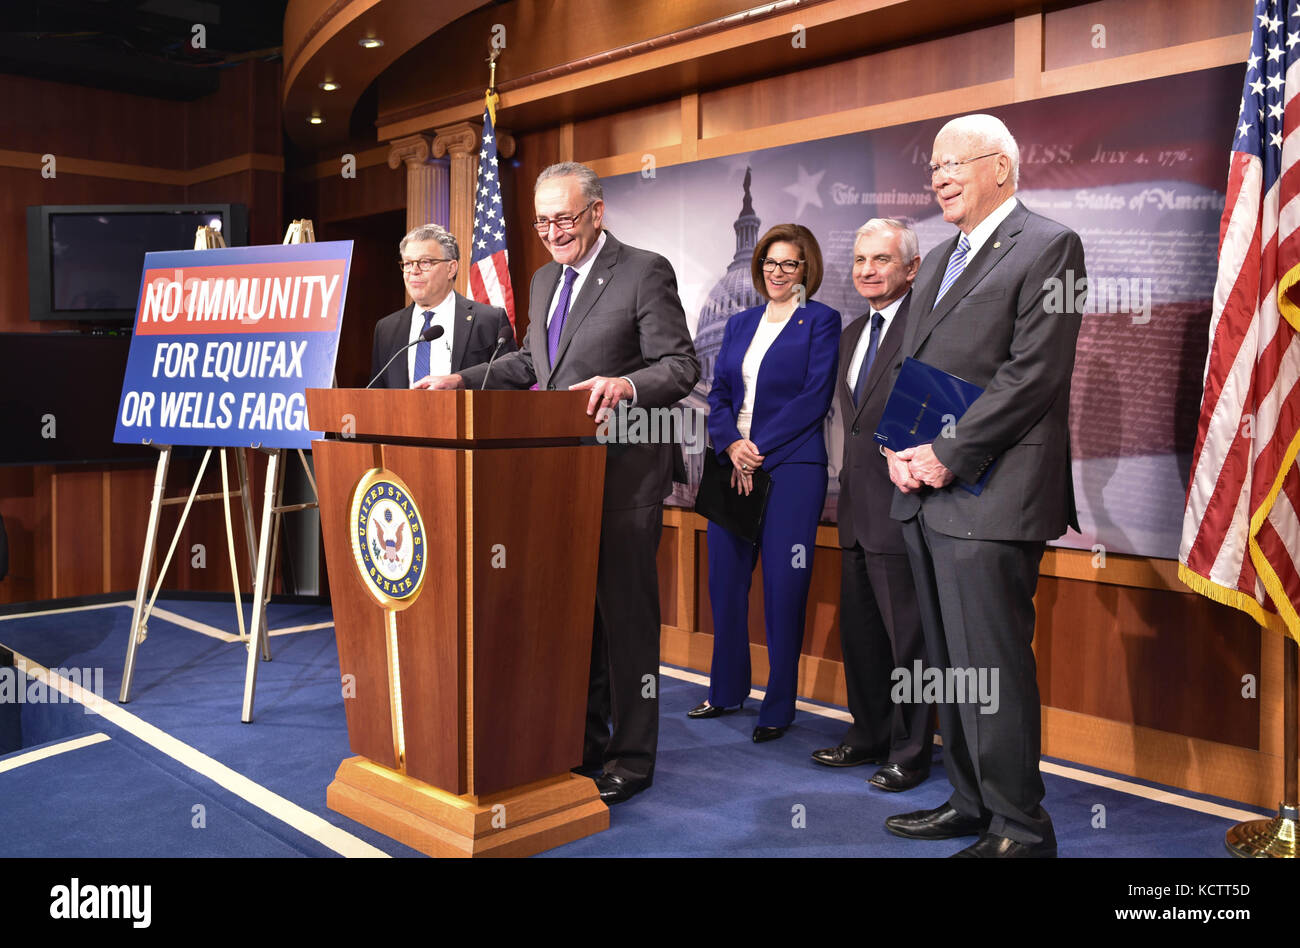 U.S Senate Minority Leader Chuck Schumer of New York, alongside fellow Democrats, holds a press conference in the wake of a massive data breach at Equifax and a scandal at Wells Fargo on Capitol Hill September 27, 2017 in Washington, DC. Standing behind Schumer is Senator Al Franken, left, Senator Catherine Cortez Masto, center, Senator Jack Reed and Senator Patrick Leahy, right. Stock Photo